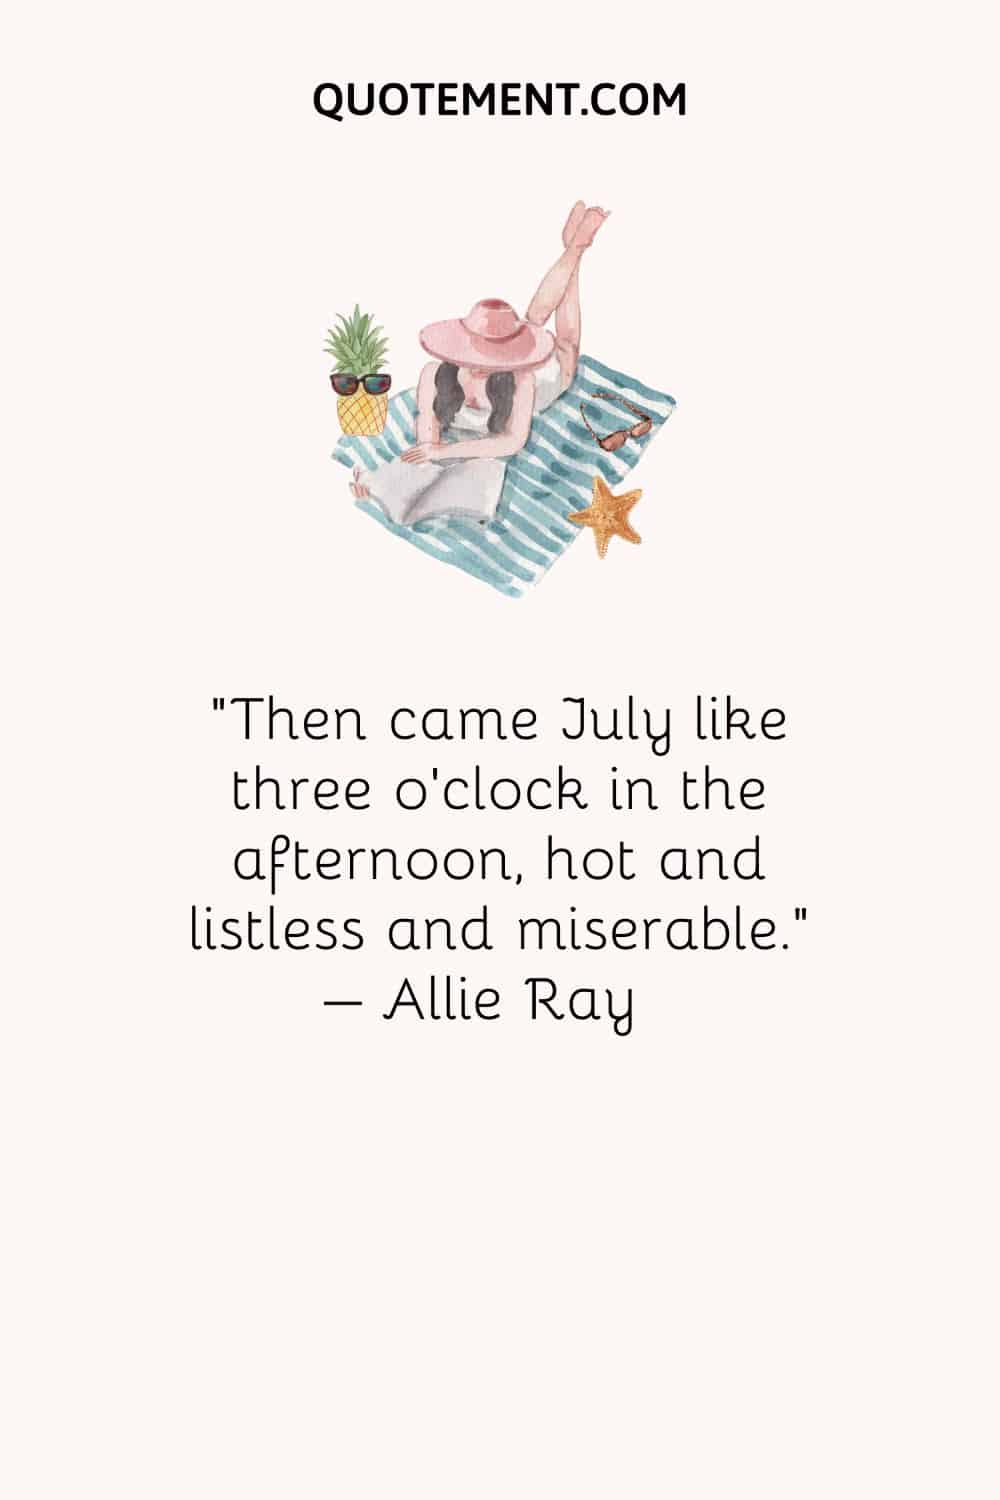 Then came July like three o'clock in the afternoon, hot and listless and miserable. – Allie Ray